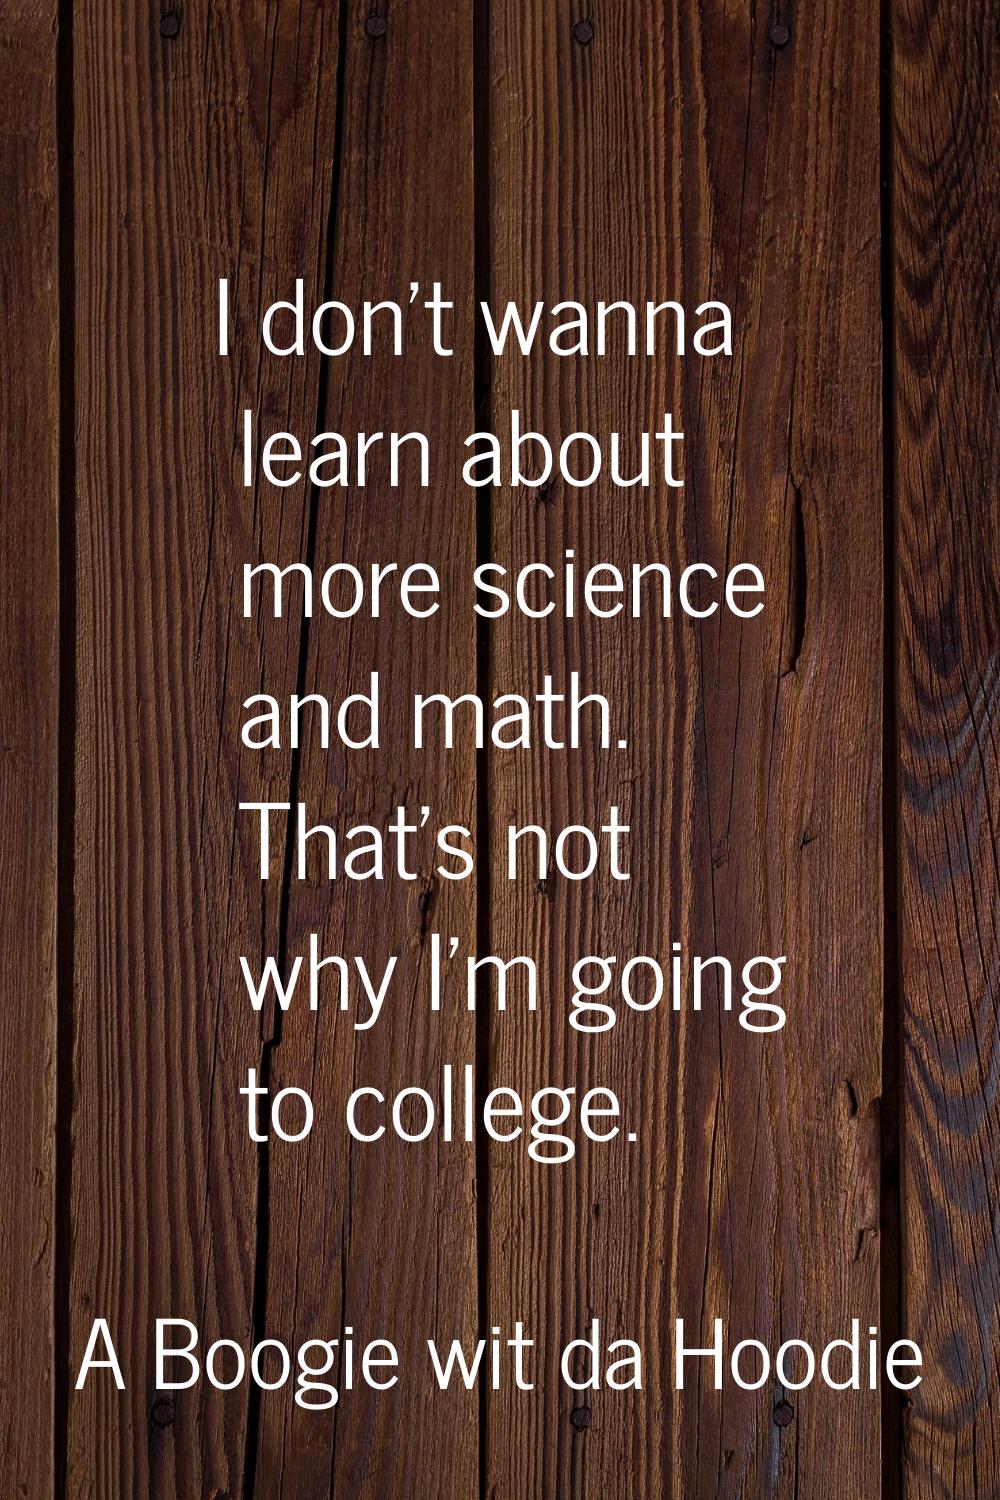 I don't wanna learn about more science and math. That's not why I'm going to college.